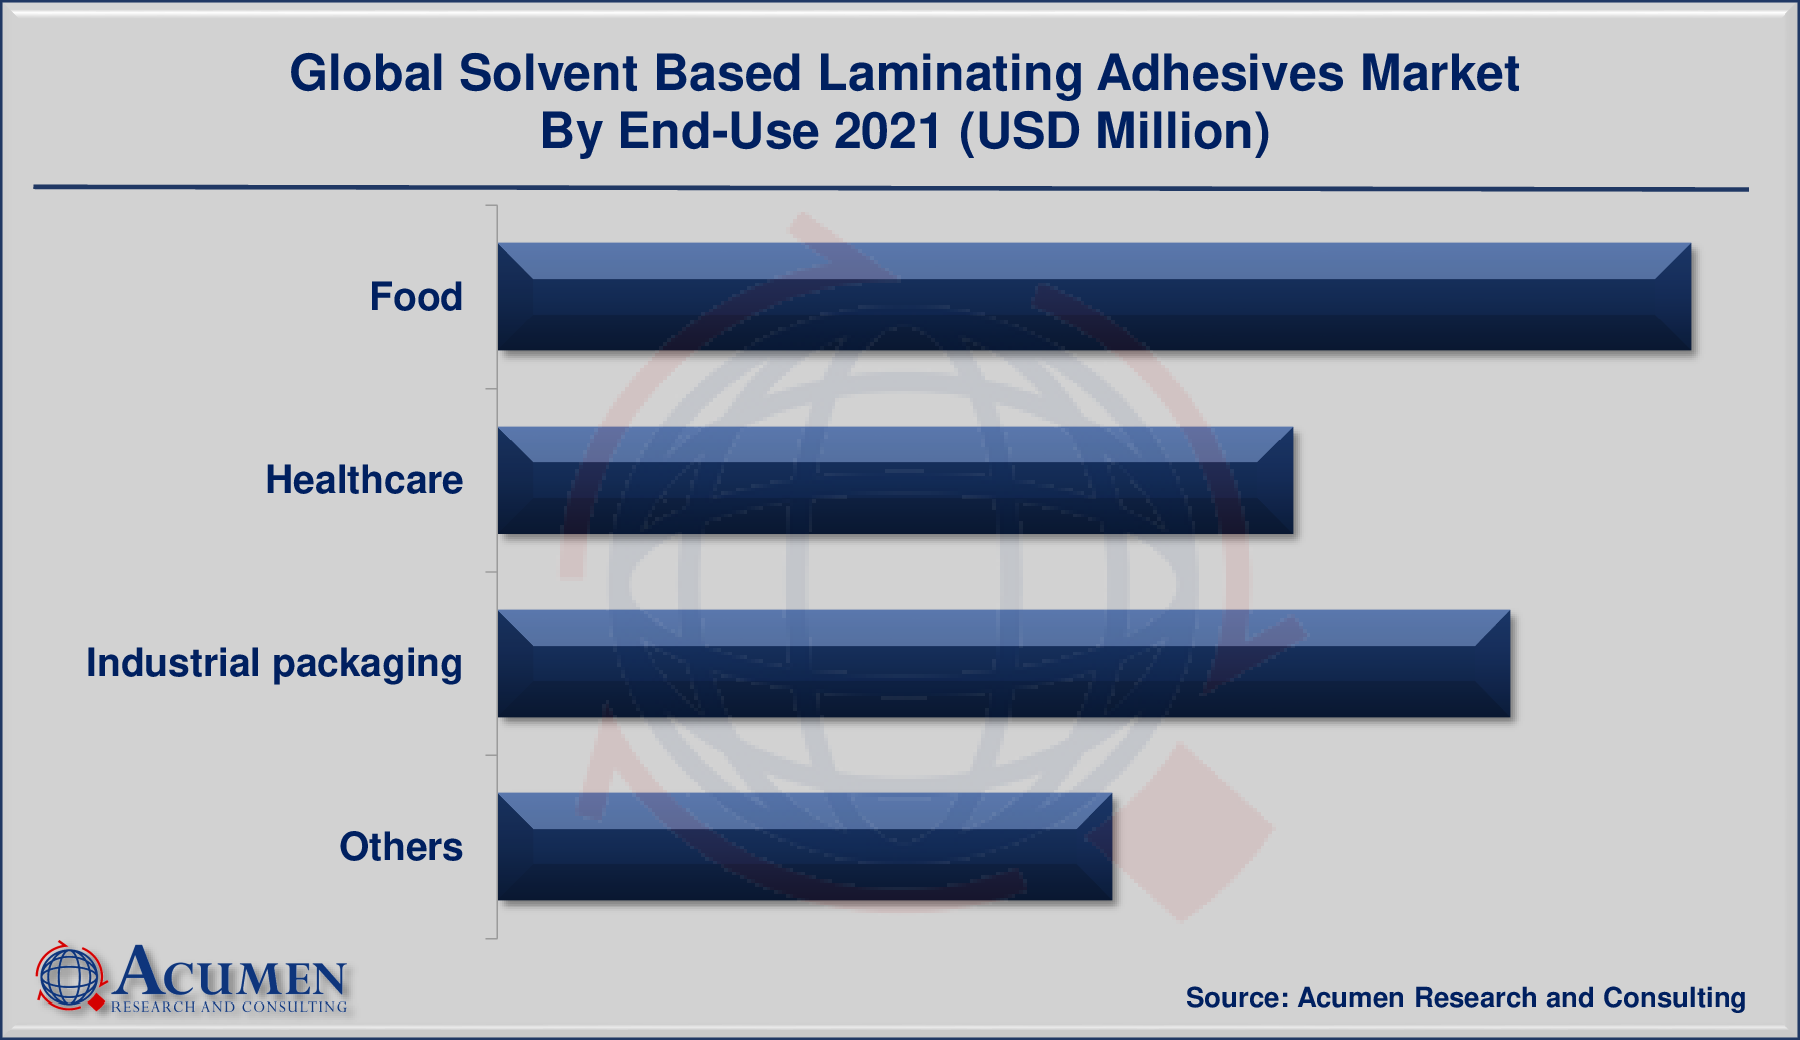 Solvent Based Laminating Adhesives Market By End-Use is predicted to be worth USD 1,084 Million by 2030, with a CAGR of 6.9%